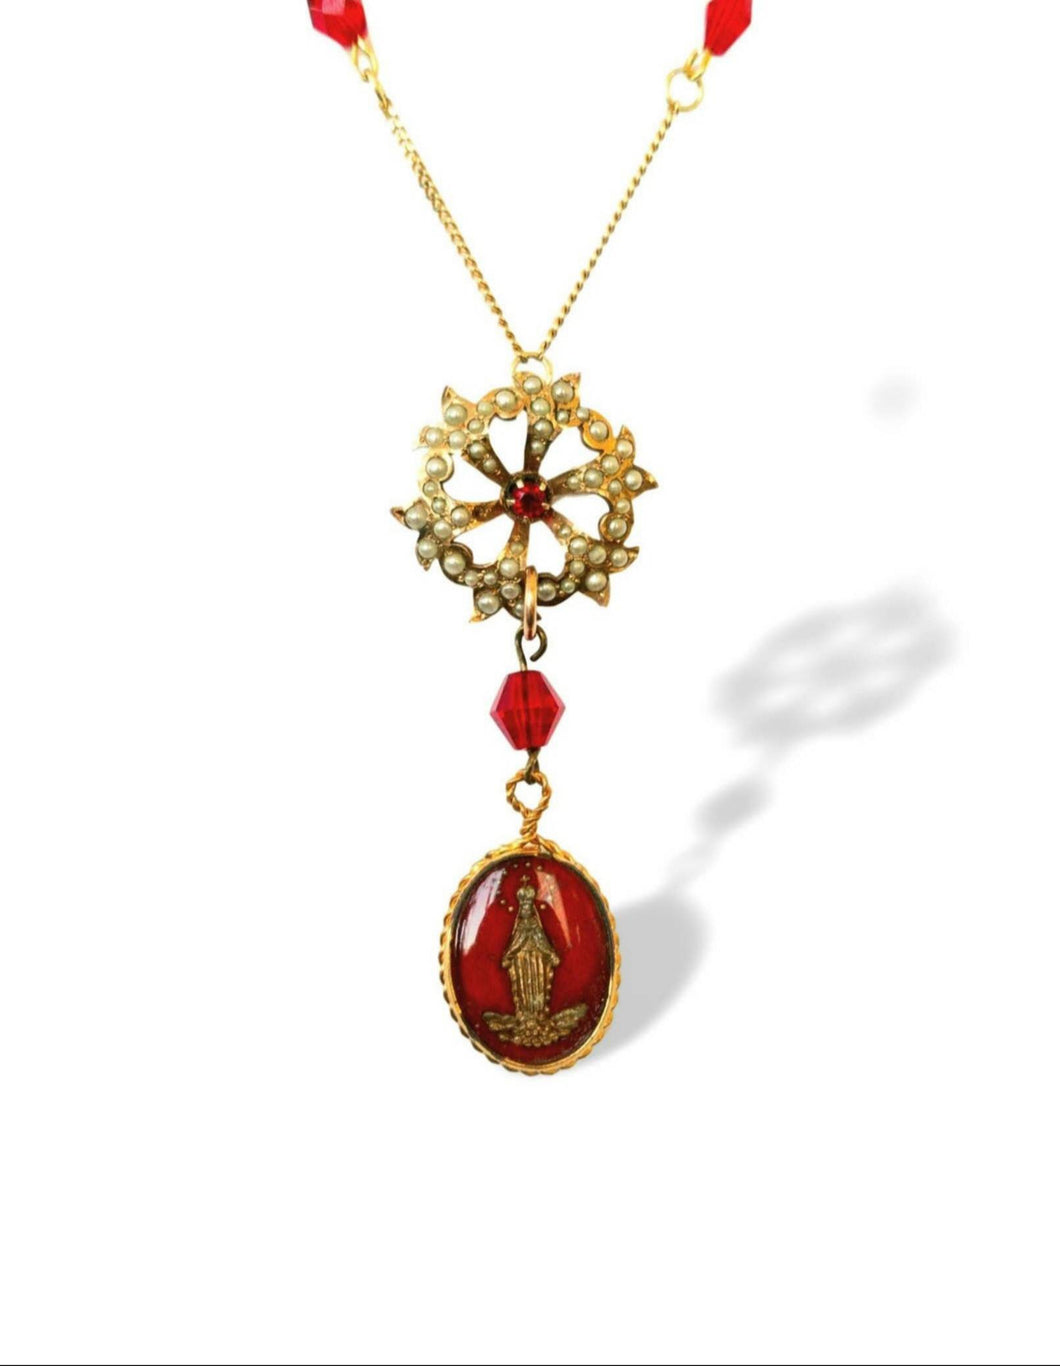 Vintage handmade art nouveau style 1940s Catholic red mercury glass medal faux pearls necklace